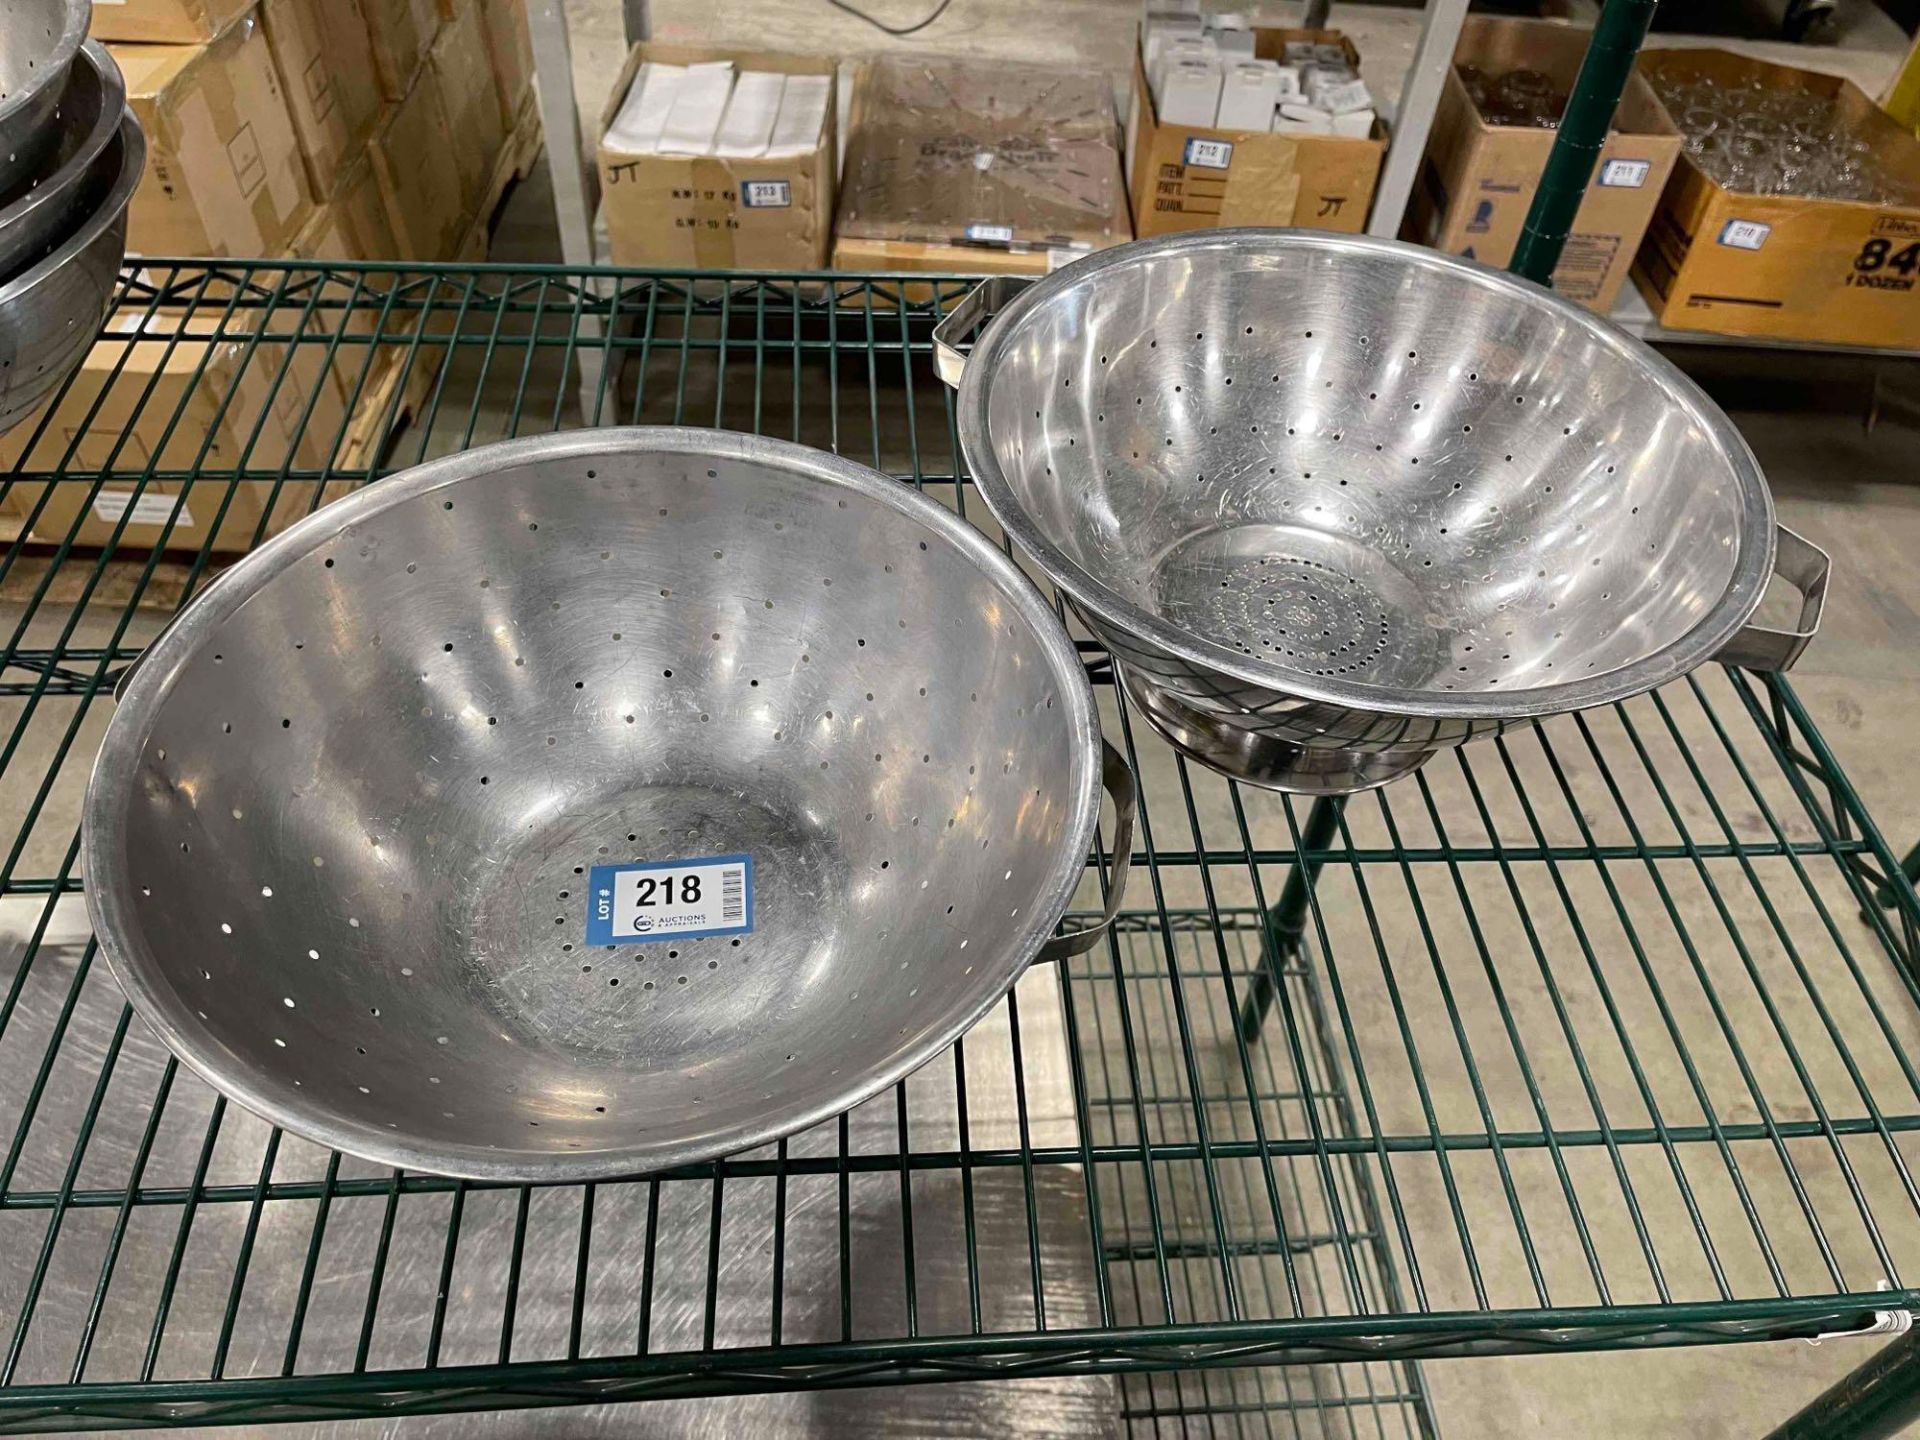 (2) SMALL STAINLESS STEEL COLANDER